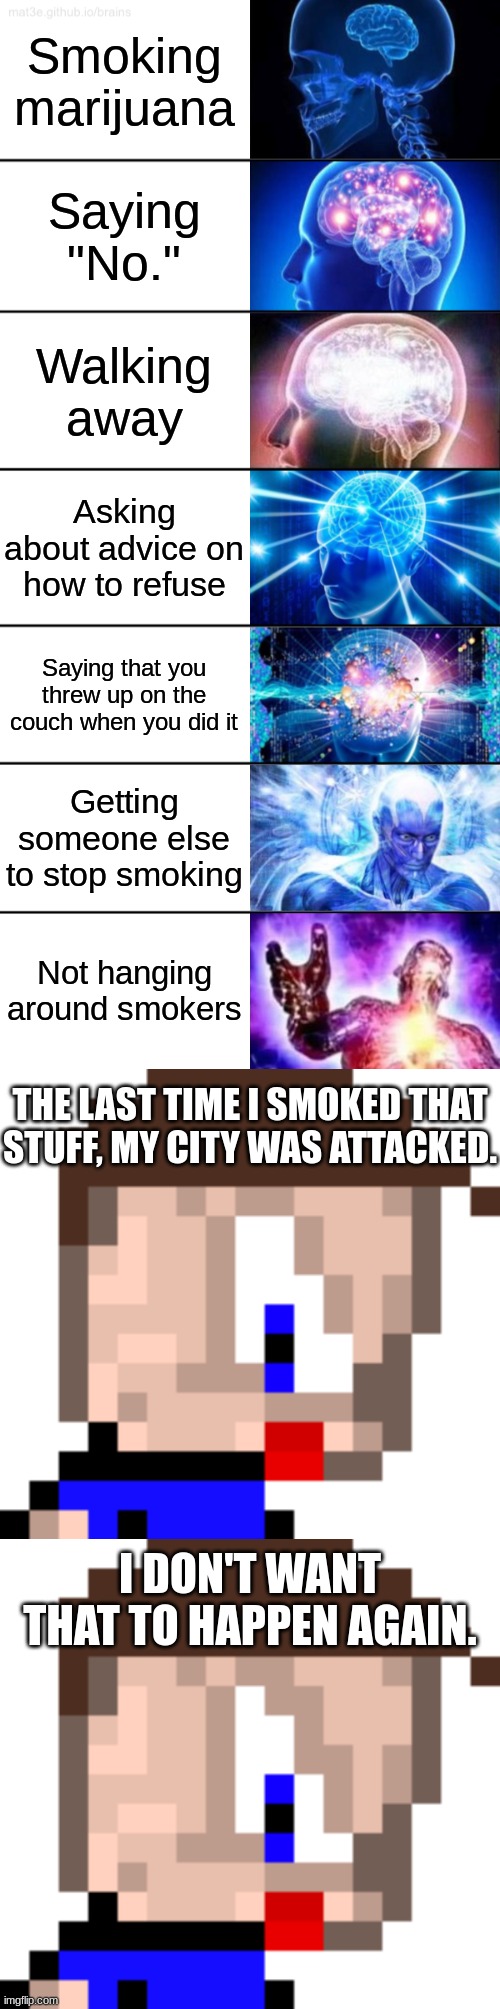 Smoking marijuana; Saying "No."; Walking away; Asking about advice on how to refuse; Saying that you threw up on the couch when you did it; Getting someone else to stop smoking; Not hanging around smokers; THE LAST TIME I SMOKED THAT STUFF, MY CITY WAS ATTACKED. I DON'T WANT THAT TO HAPPEN AGAIN. | image tagged in 7-tier expanding brain,no | made w/ Imgflip meme maker